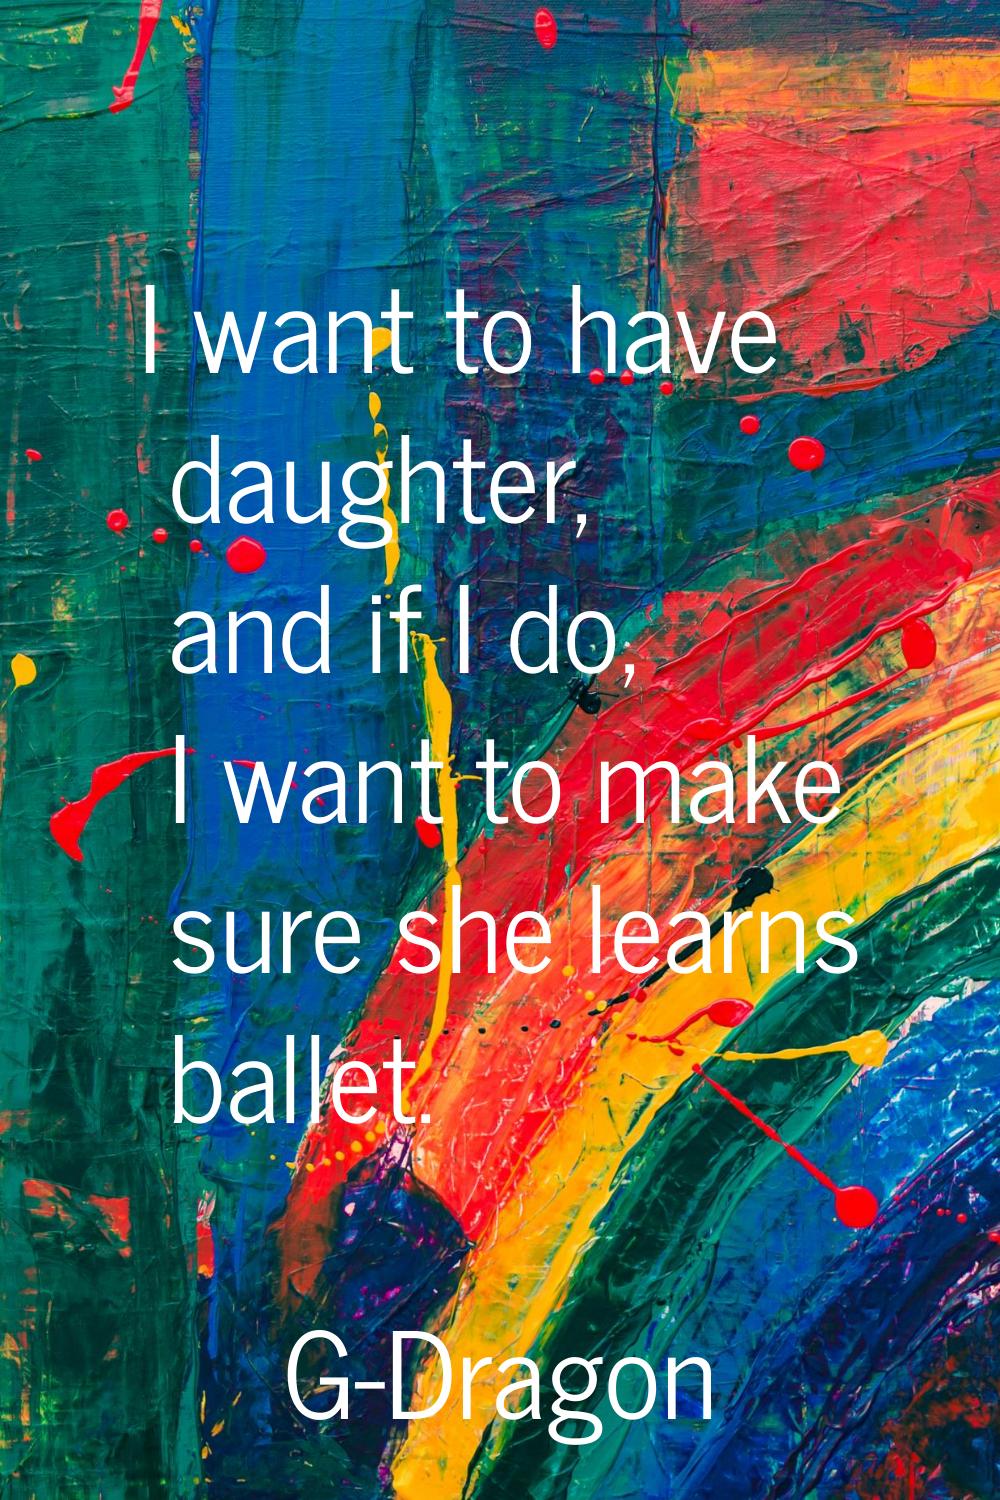 I want to have daughter, and if I do, I want to make sure she learns ballet.